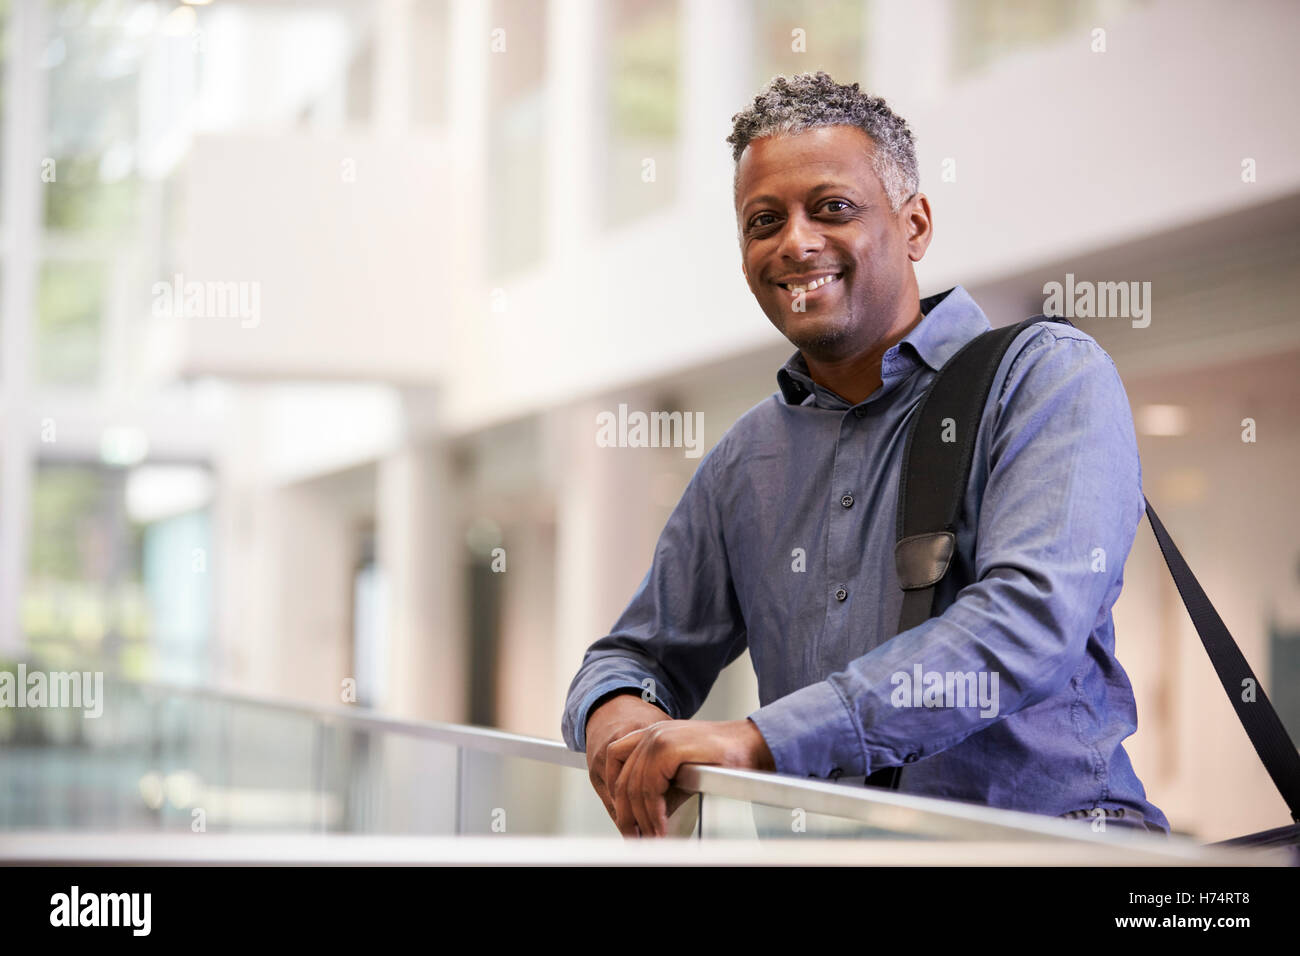 Middle aged black man  smiling in modern building lobby Stock Photo